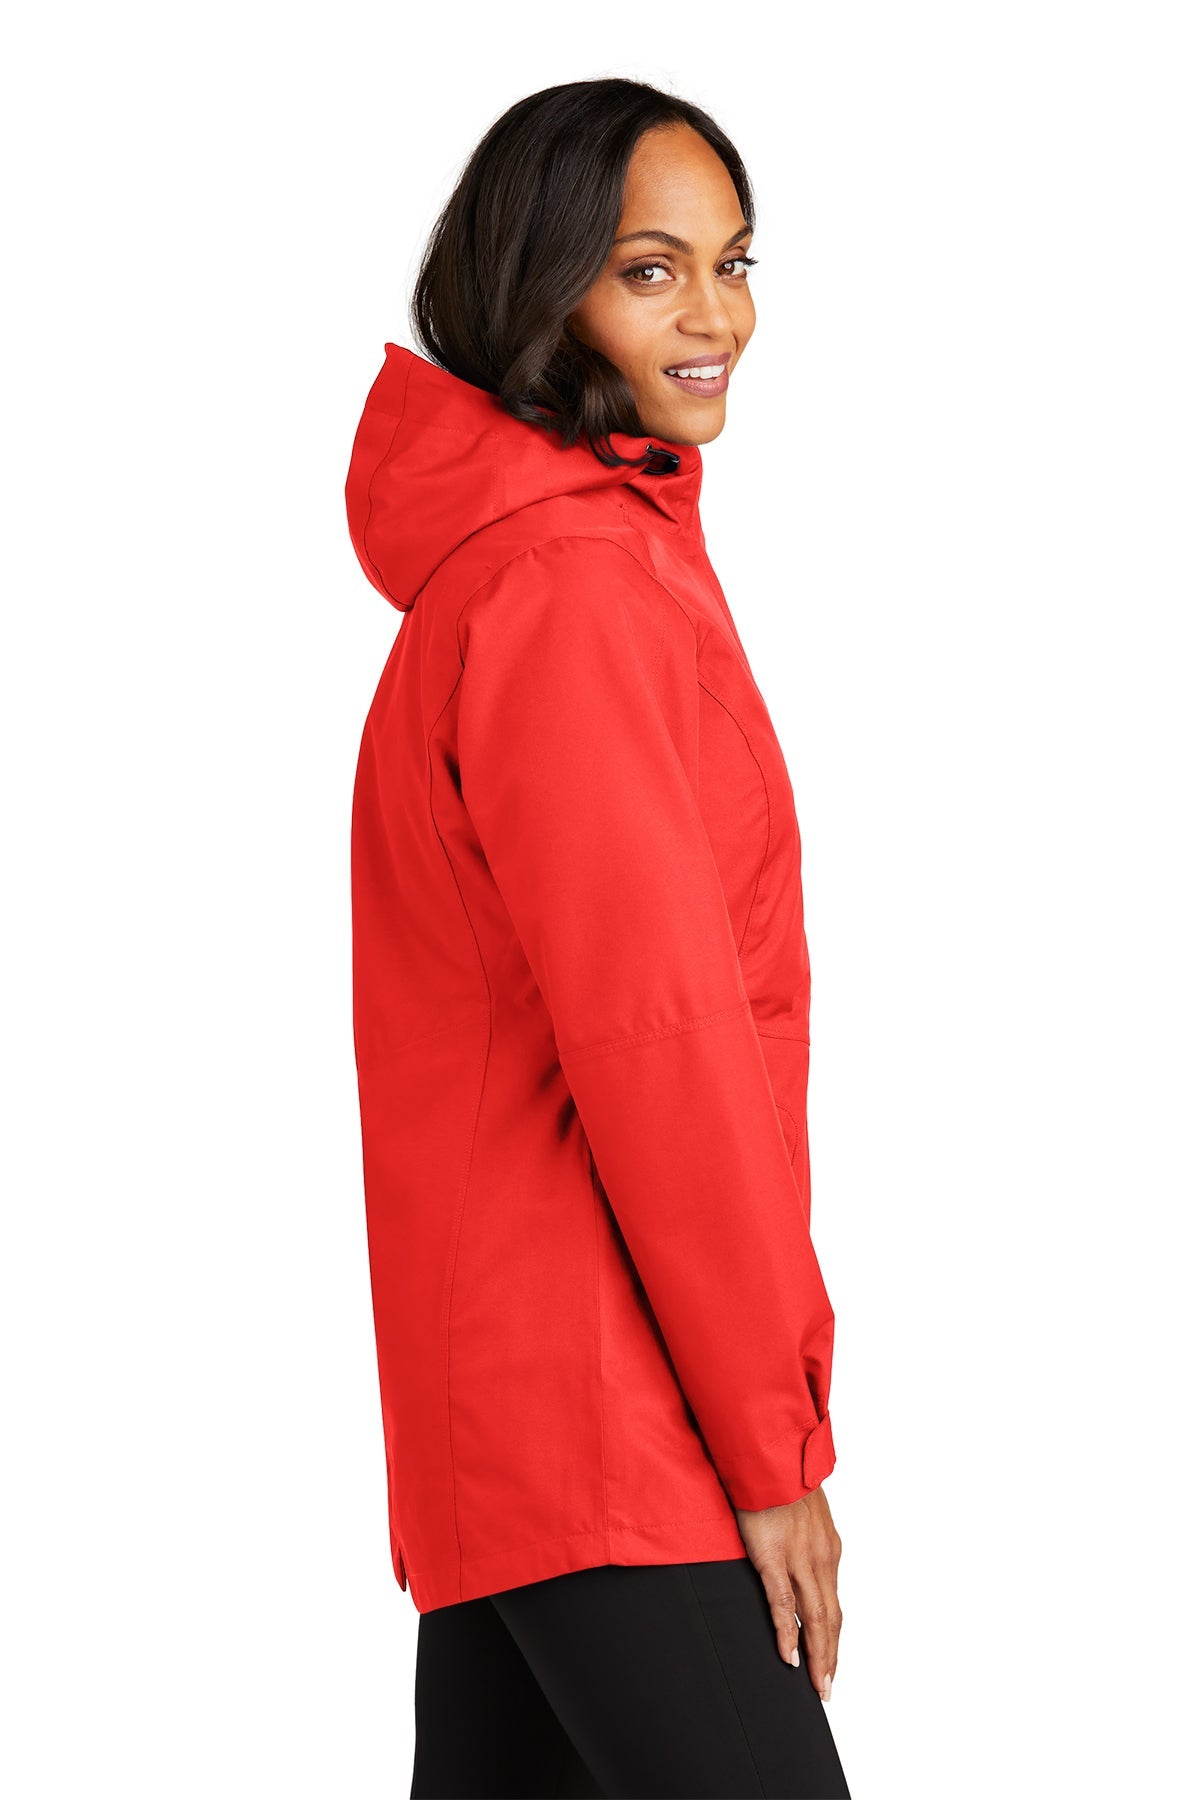 Port Authority Ladies Collective Customized Outer Shell Jackets, Red Pepper